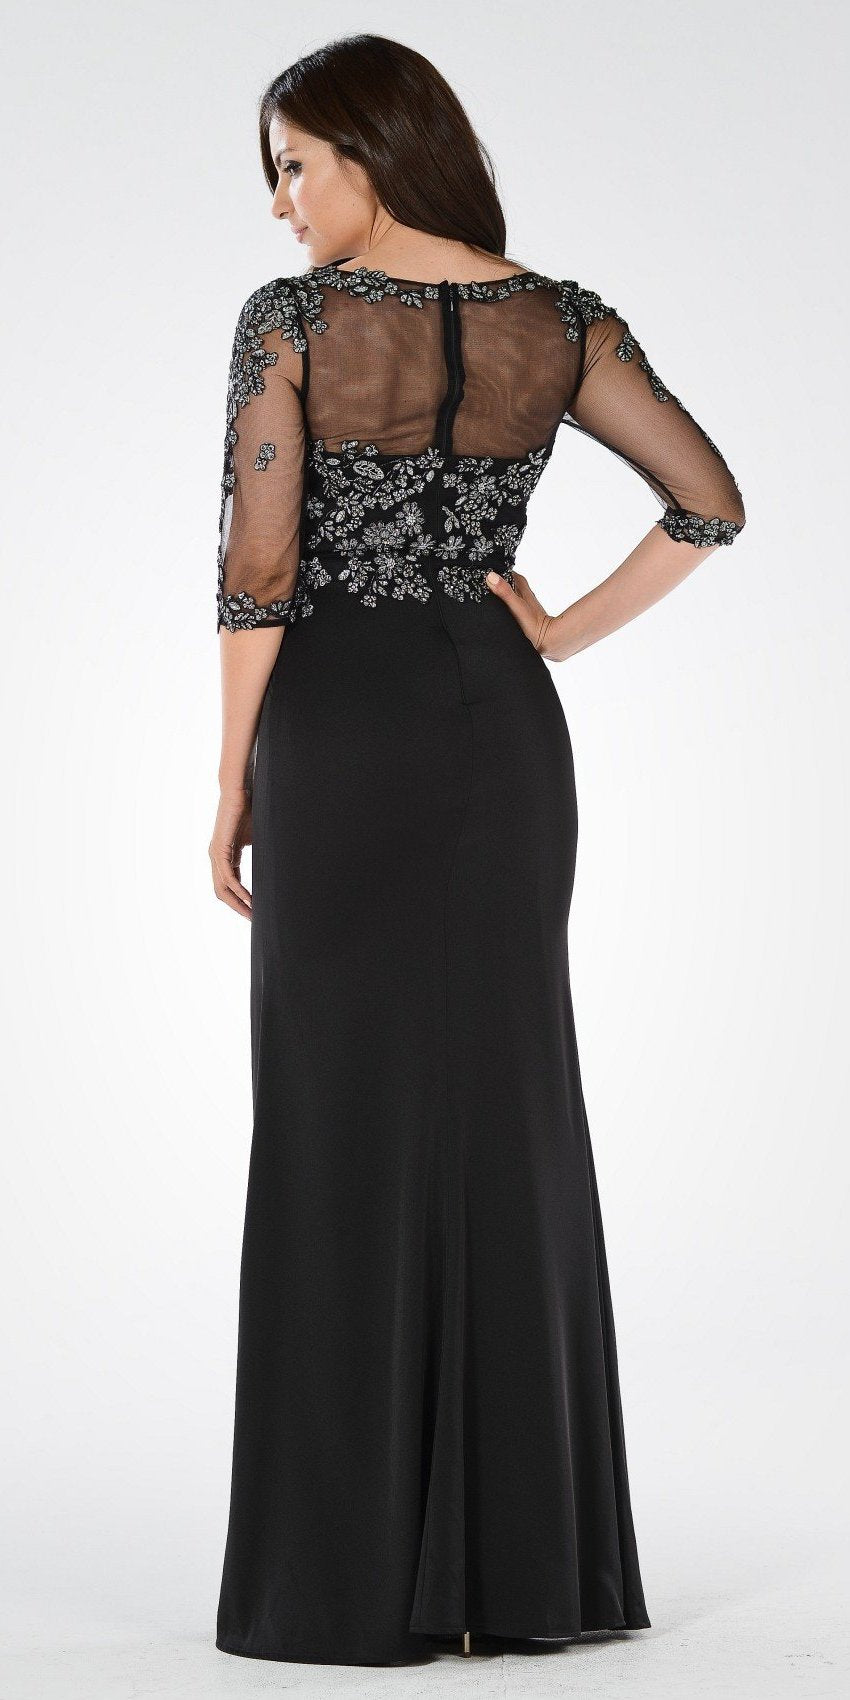 Black Mesh Embroidered Bodice Mid Sleeves Formal Dress with Slit